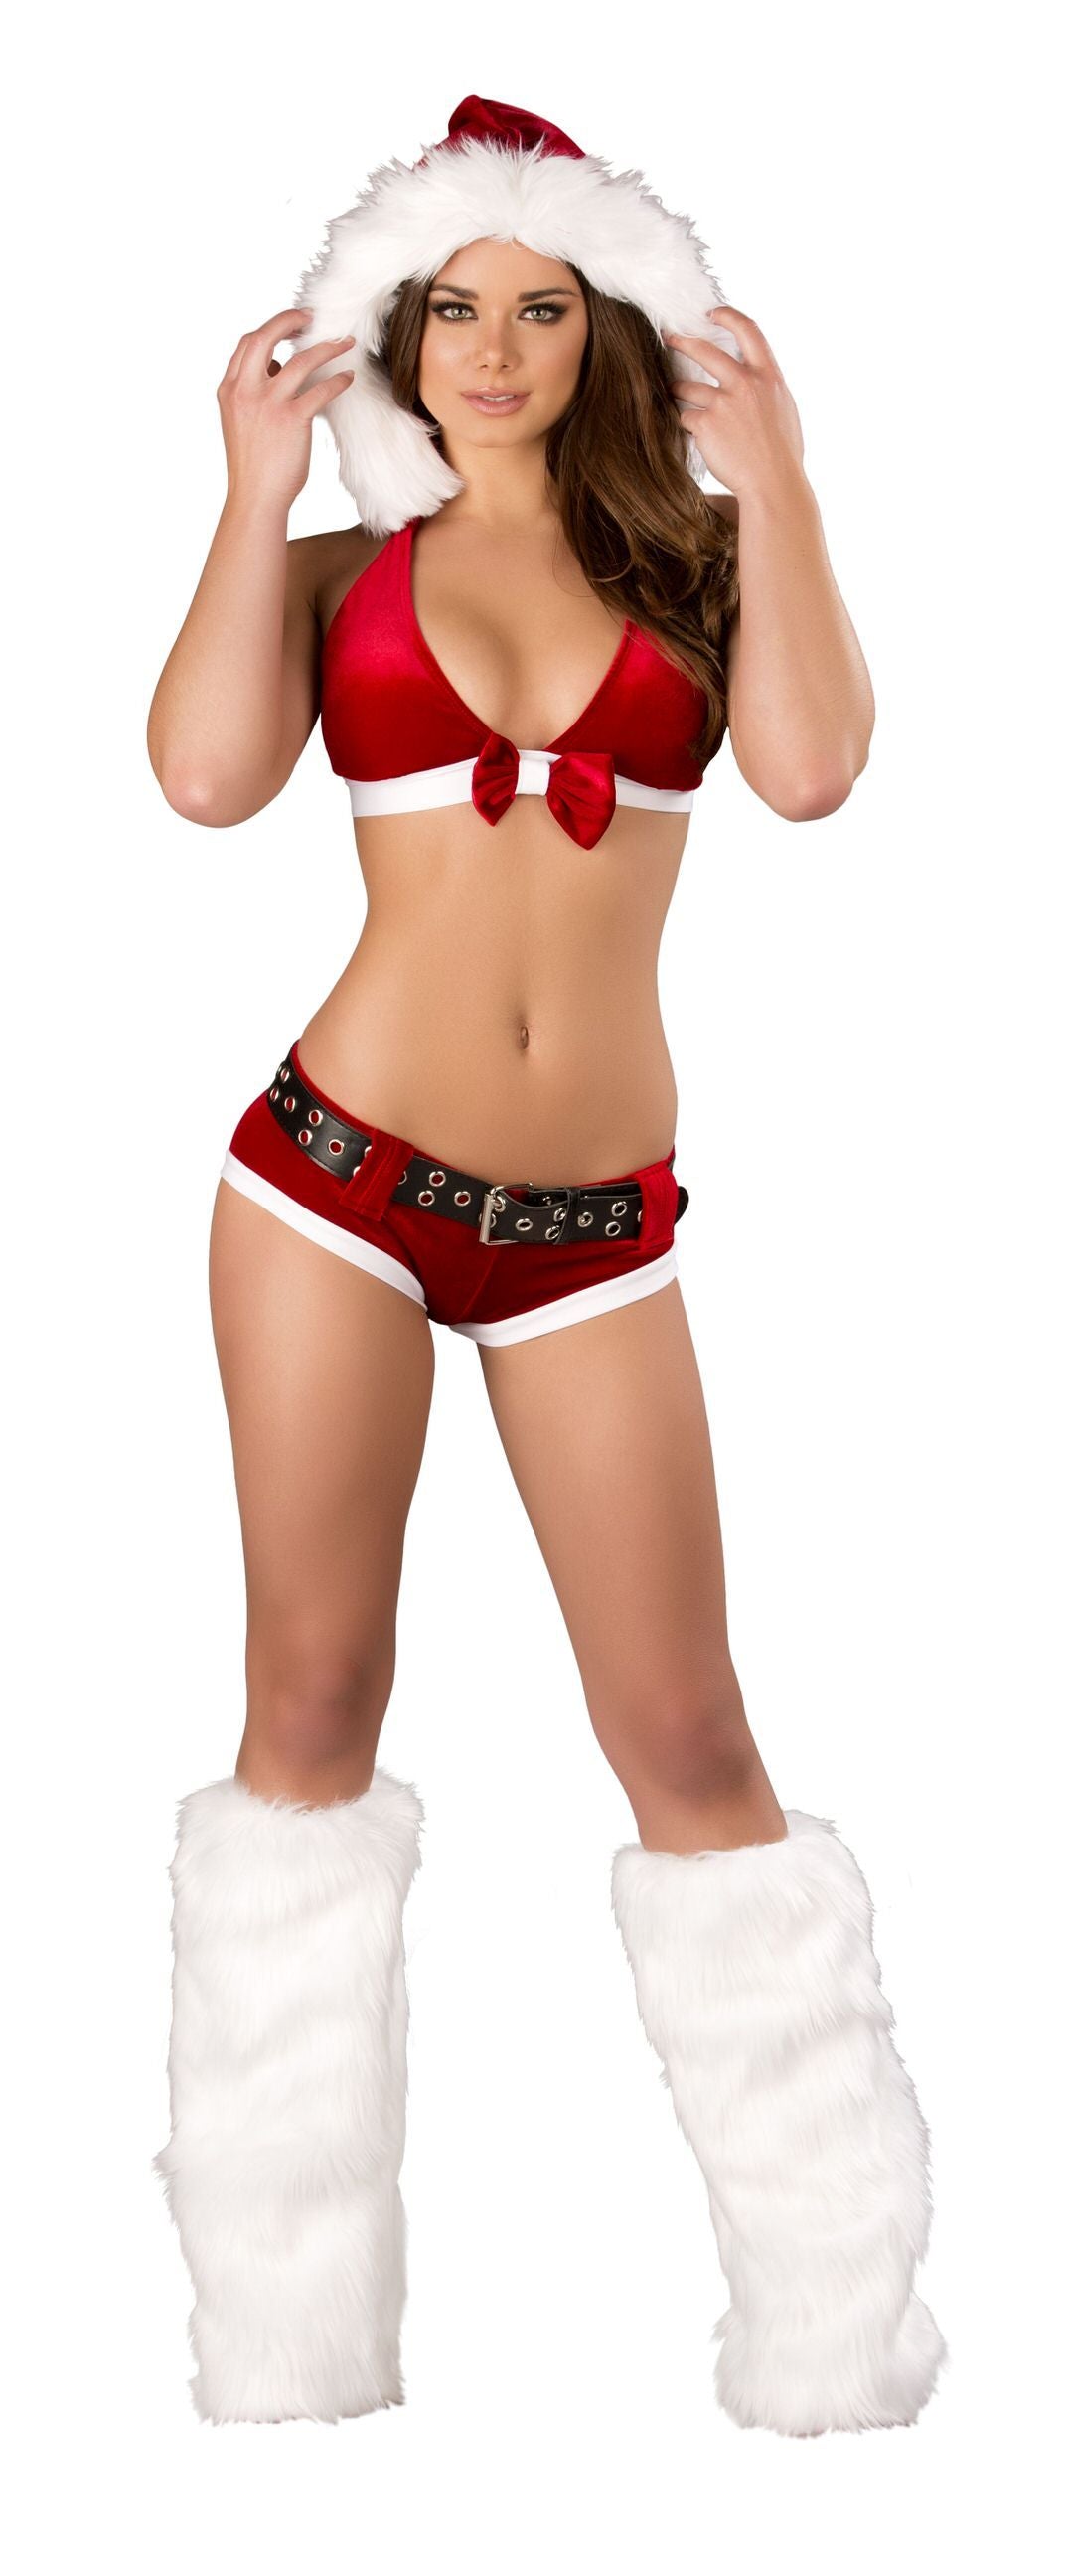 Buy 3pc Santa’s Little HoHoHo from RomaRetailShop for 64.99 with Same Day Shipping Designed by Roma Costume C171-AS-S/M